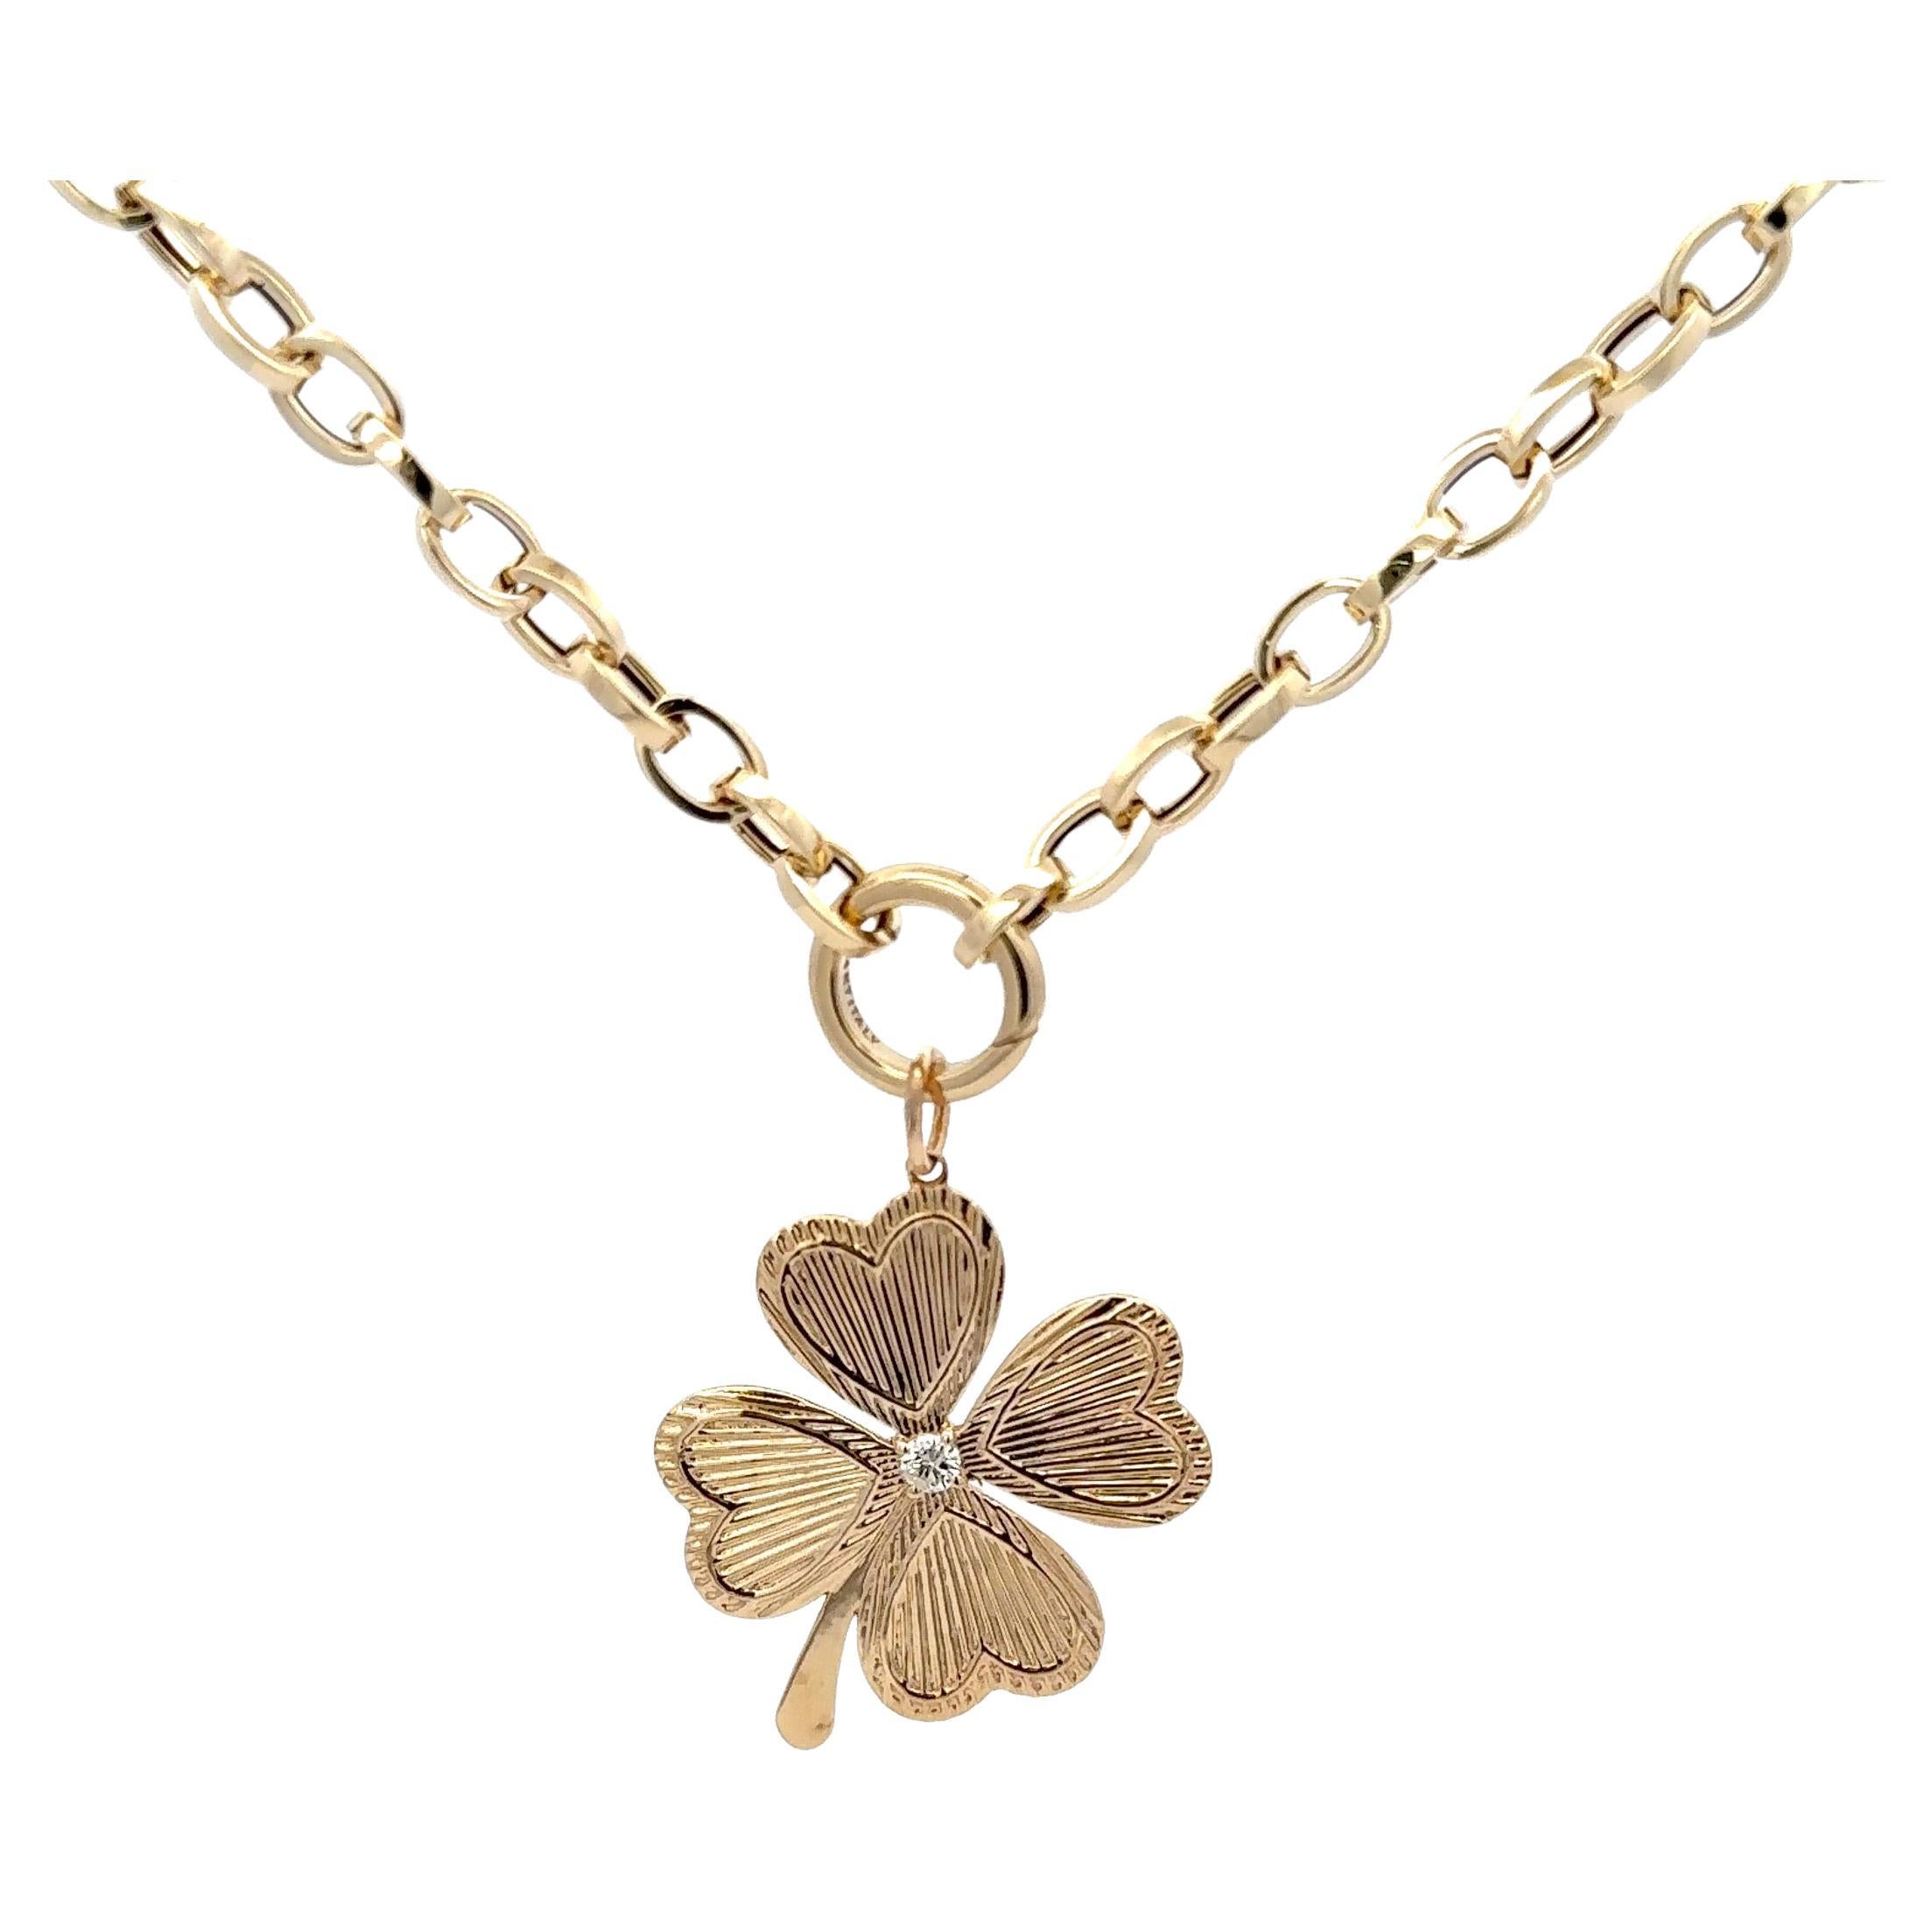 Italian Four Leaf Clover Diamond Pendant on Belcher Clasp Link Chain 18 Inches